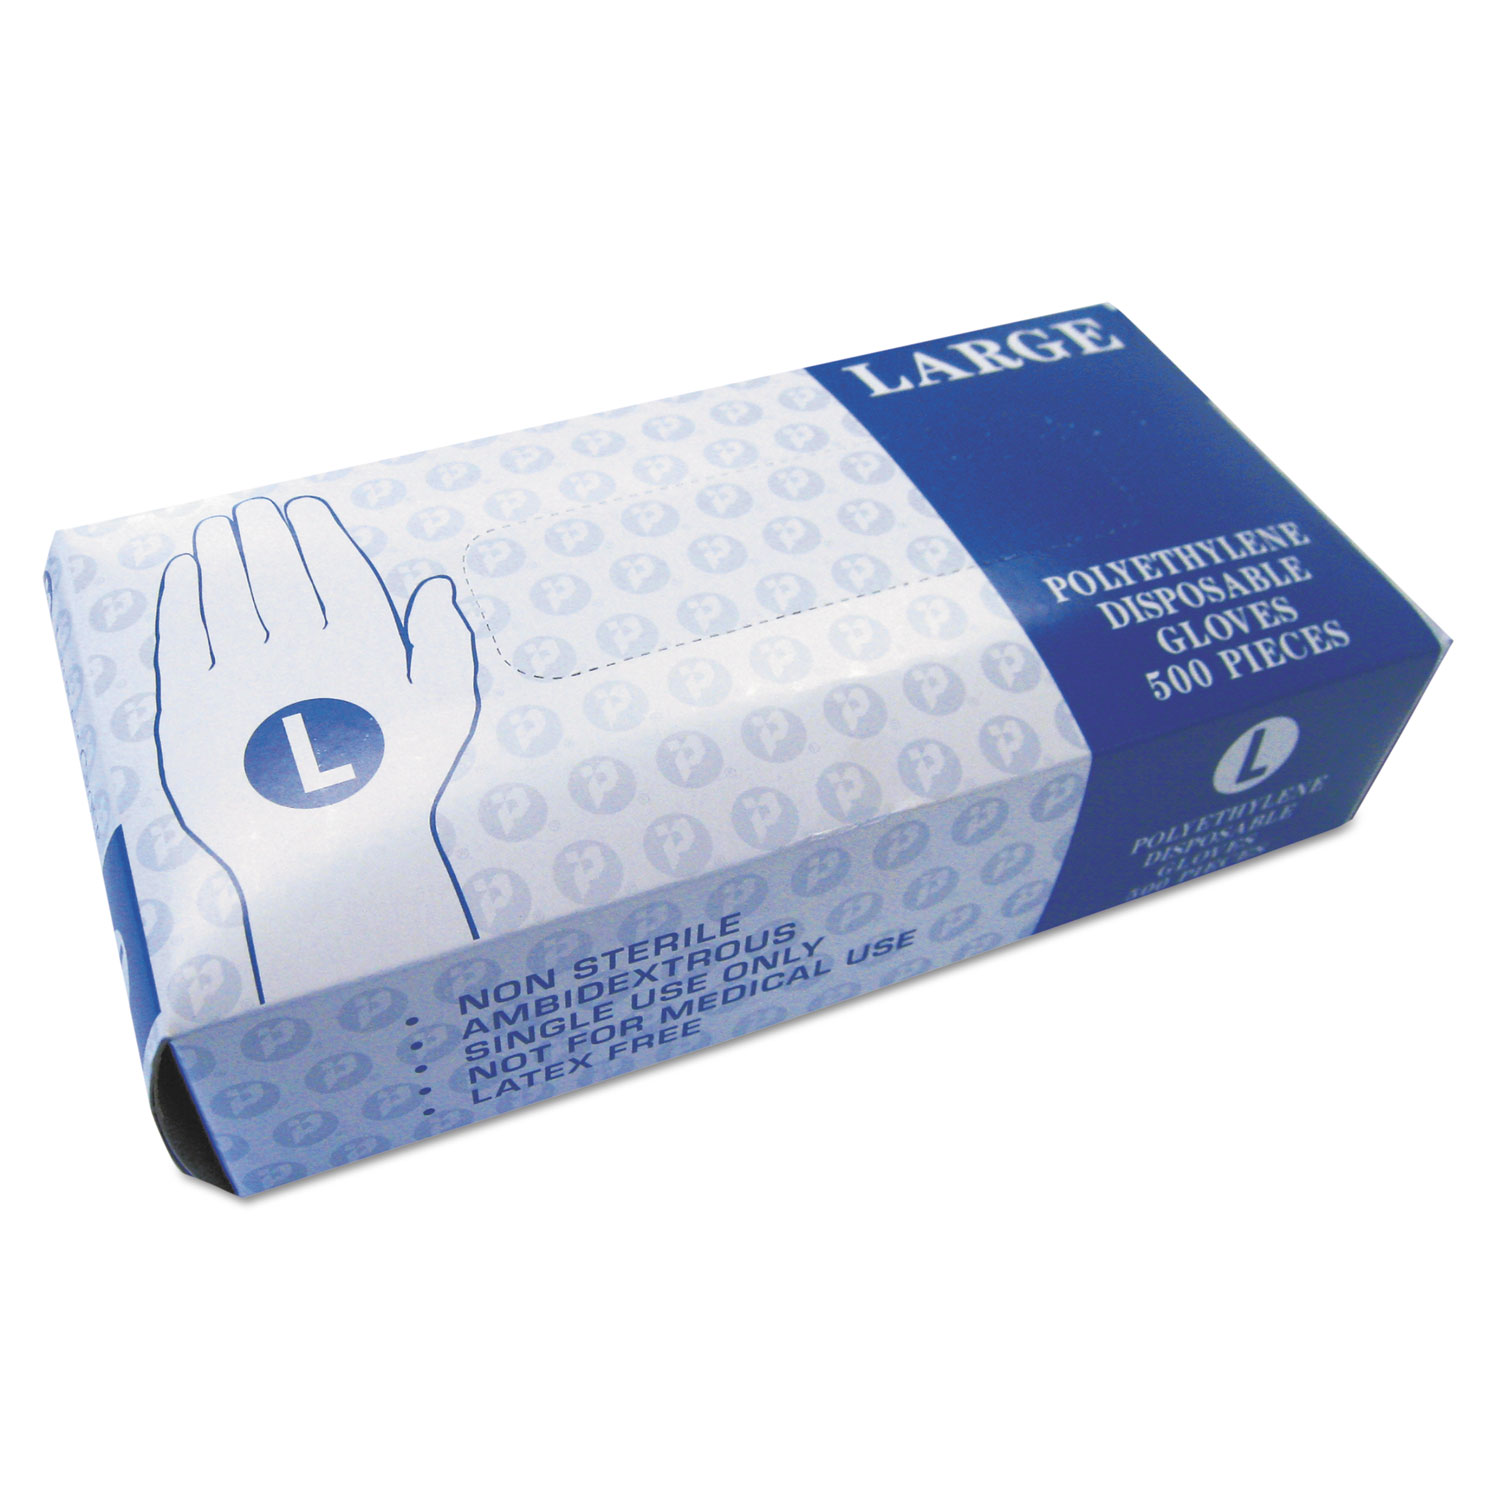  Inteplast Group GL-LG2K Embossed Polyethylene Disposable Gloves, Large, Powder-Free, Clear, 500/Box, 4 Boxes/Carton (IBSGLLG2K) 